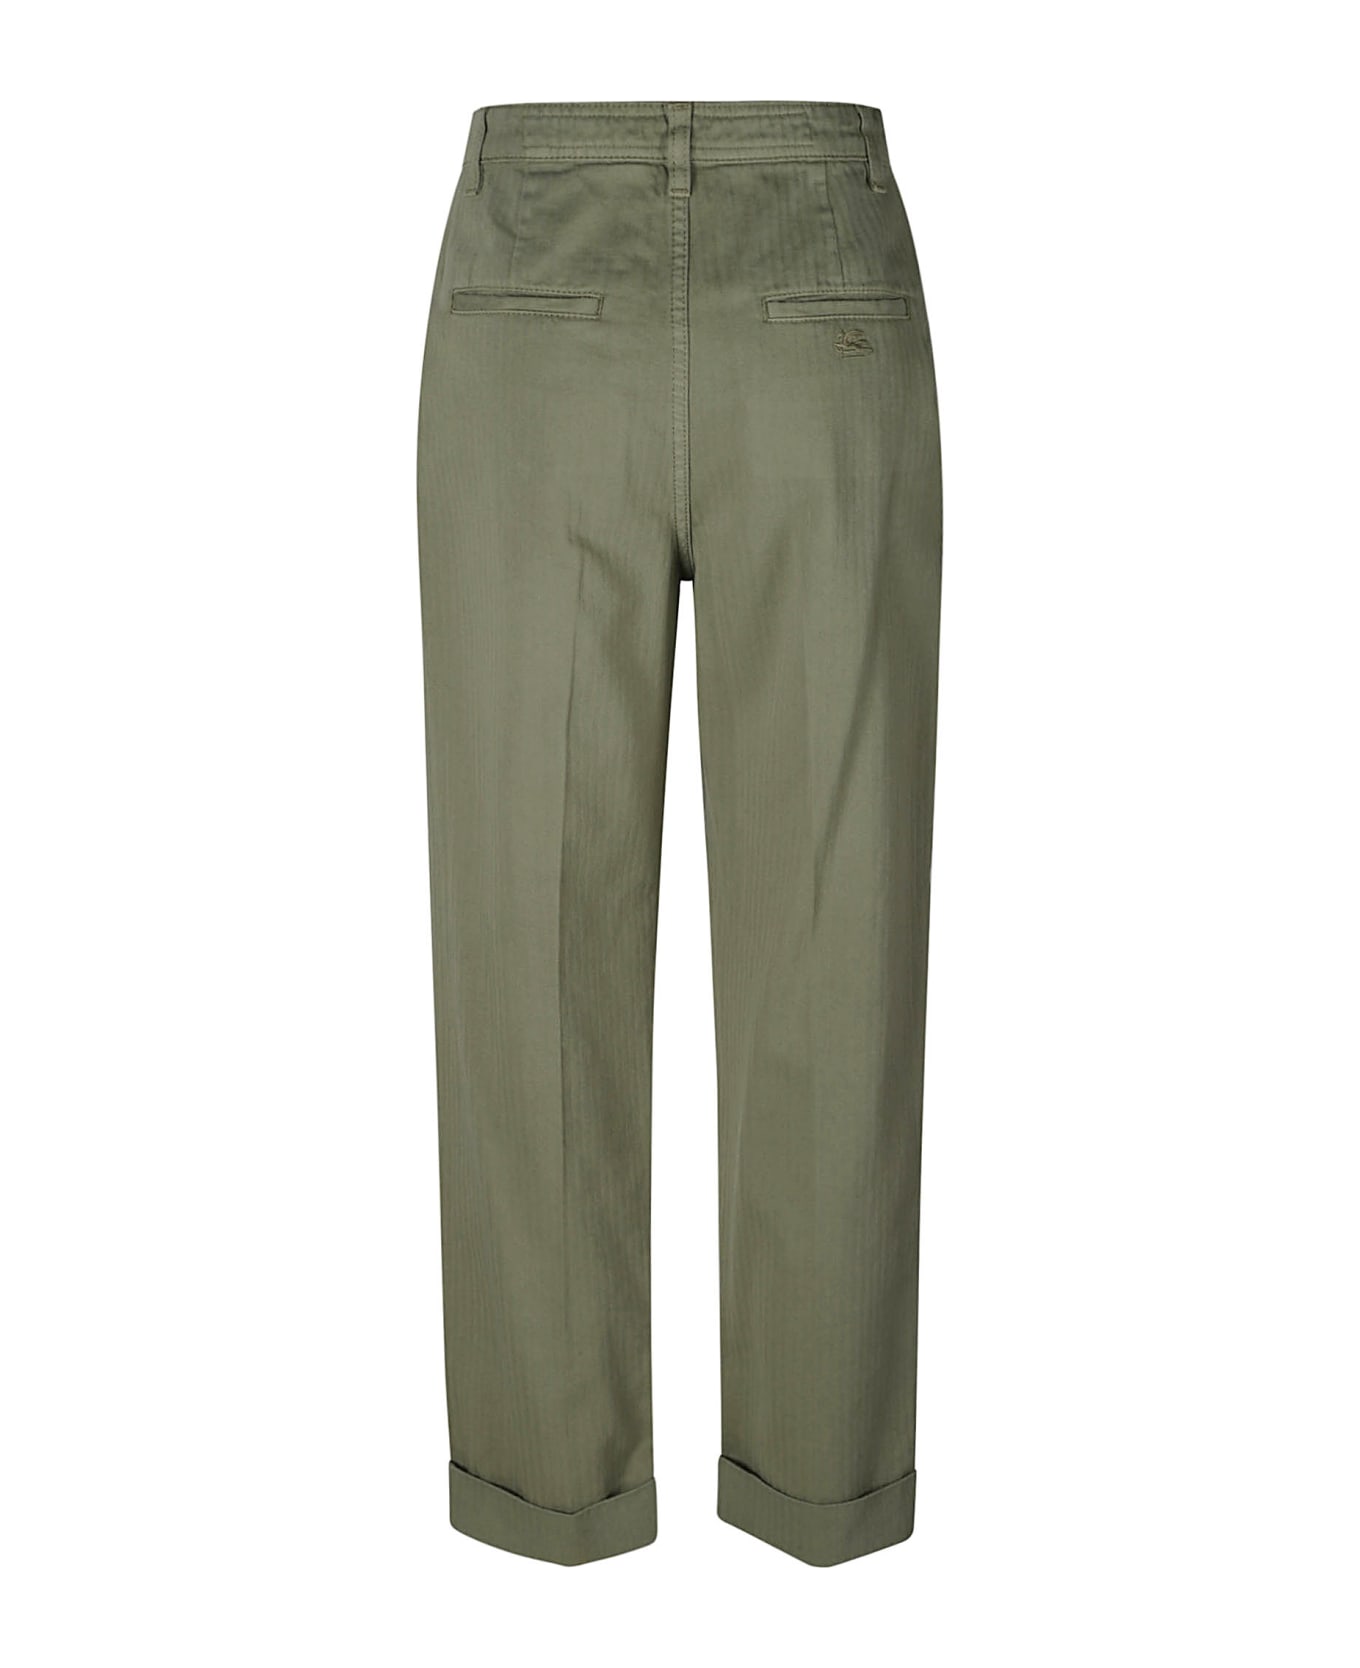 Etro Cropped Chino Trousers - Green ボトムス